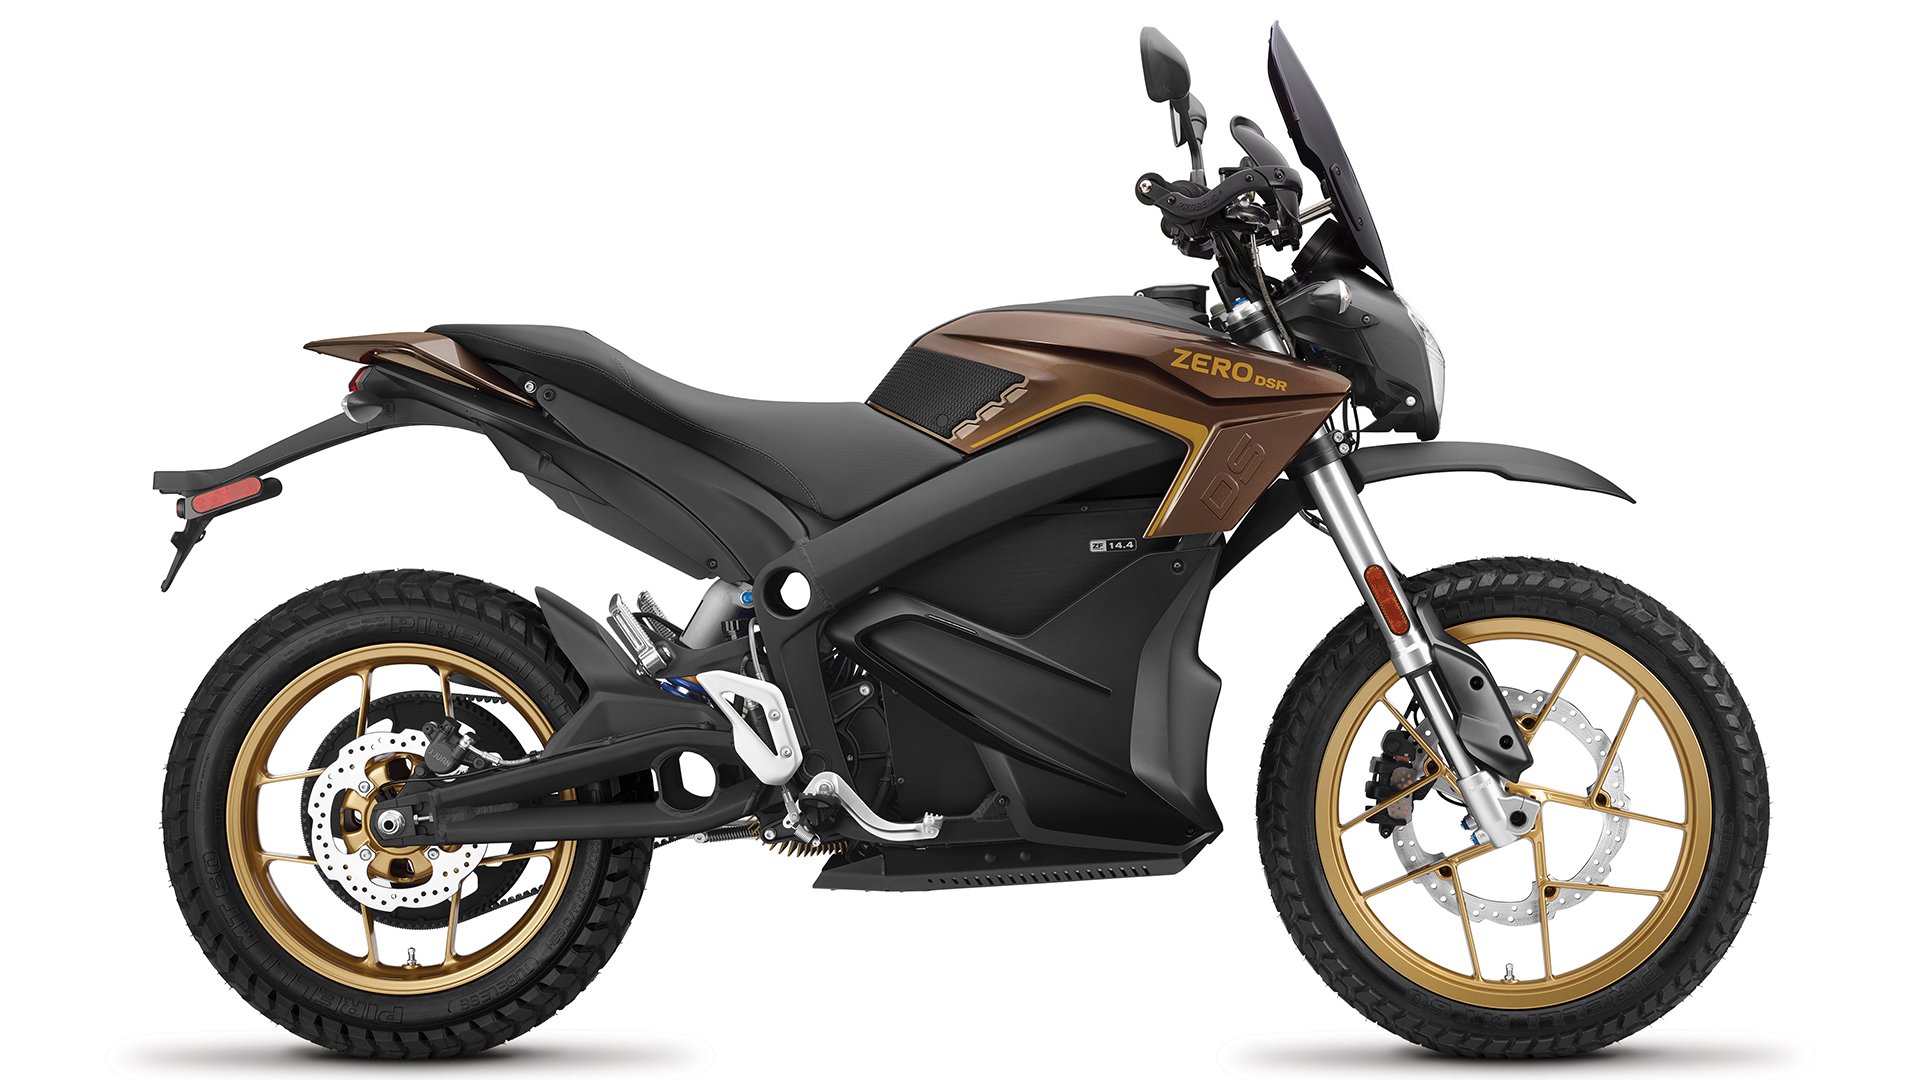 Top 5 electric motorcycles and scooters | AutoTrader